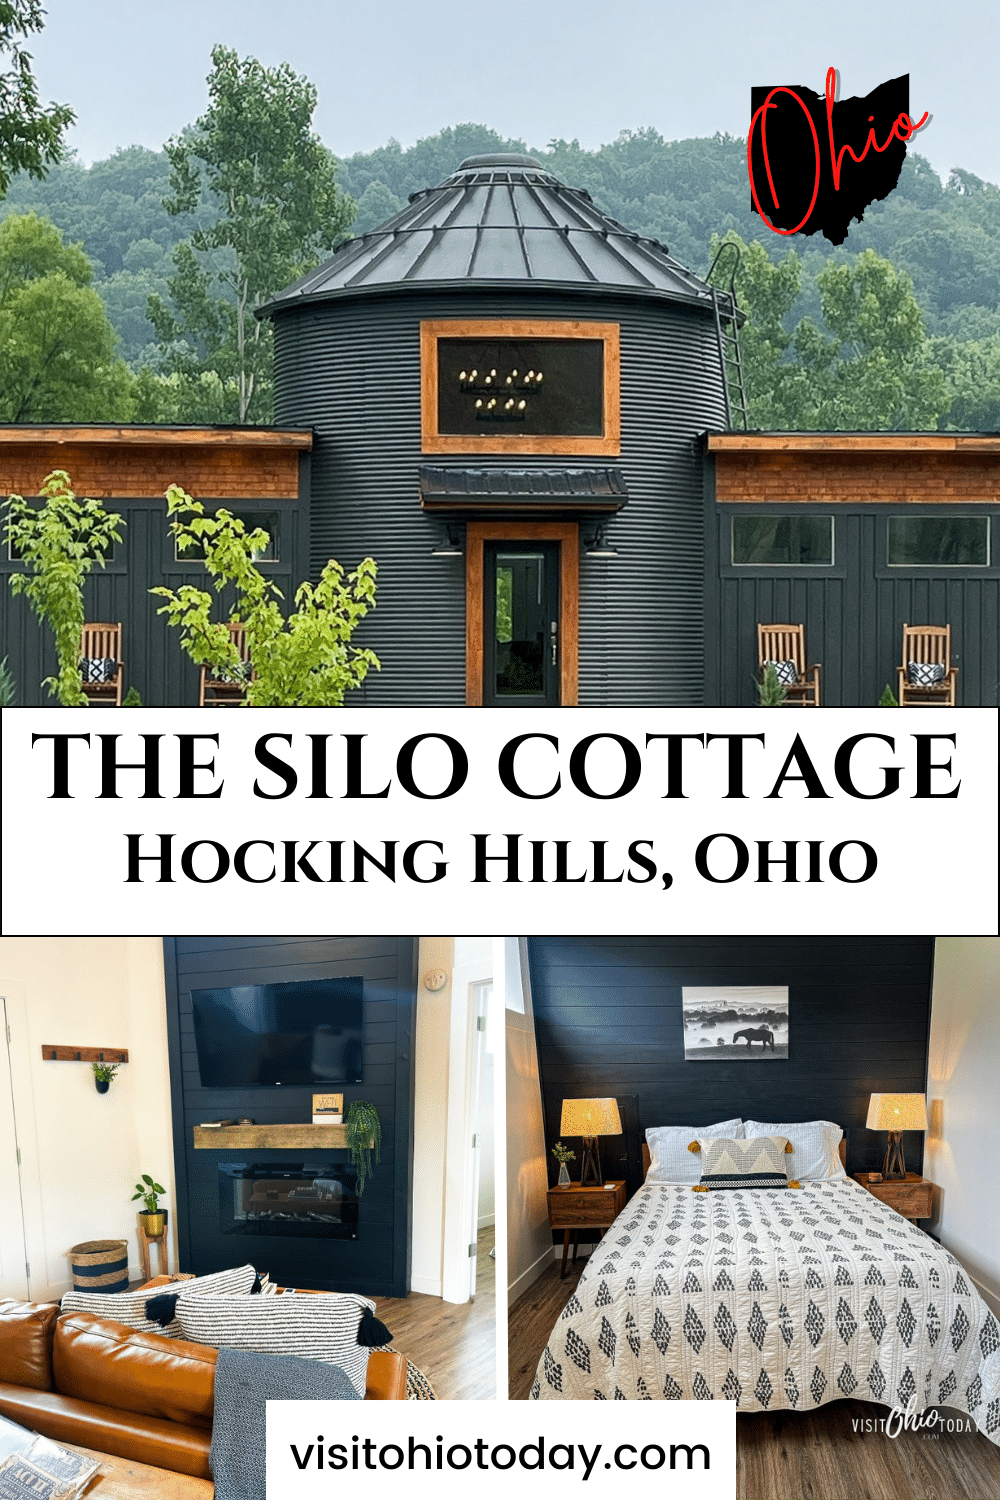 Escape to The Silo Cottage in Hocking Hills for a romantic, fully-equipped tiny home retreat amidst nature's grandeur - book now for an unforgettable getaway!